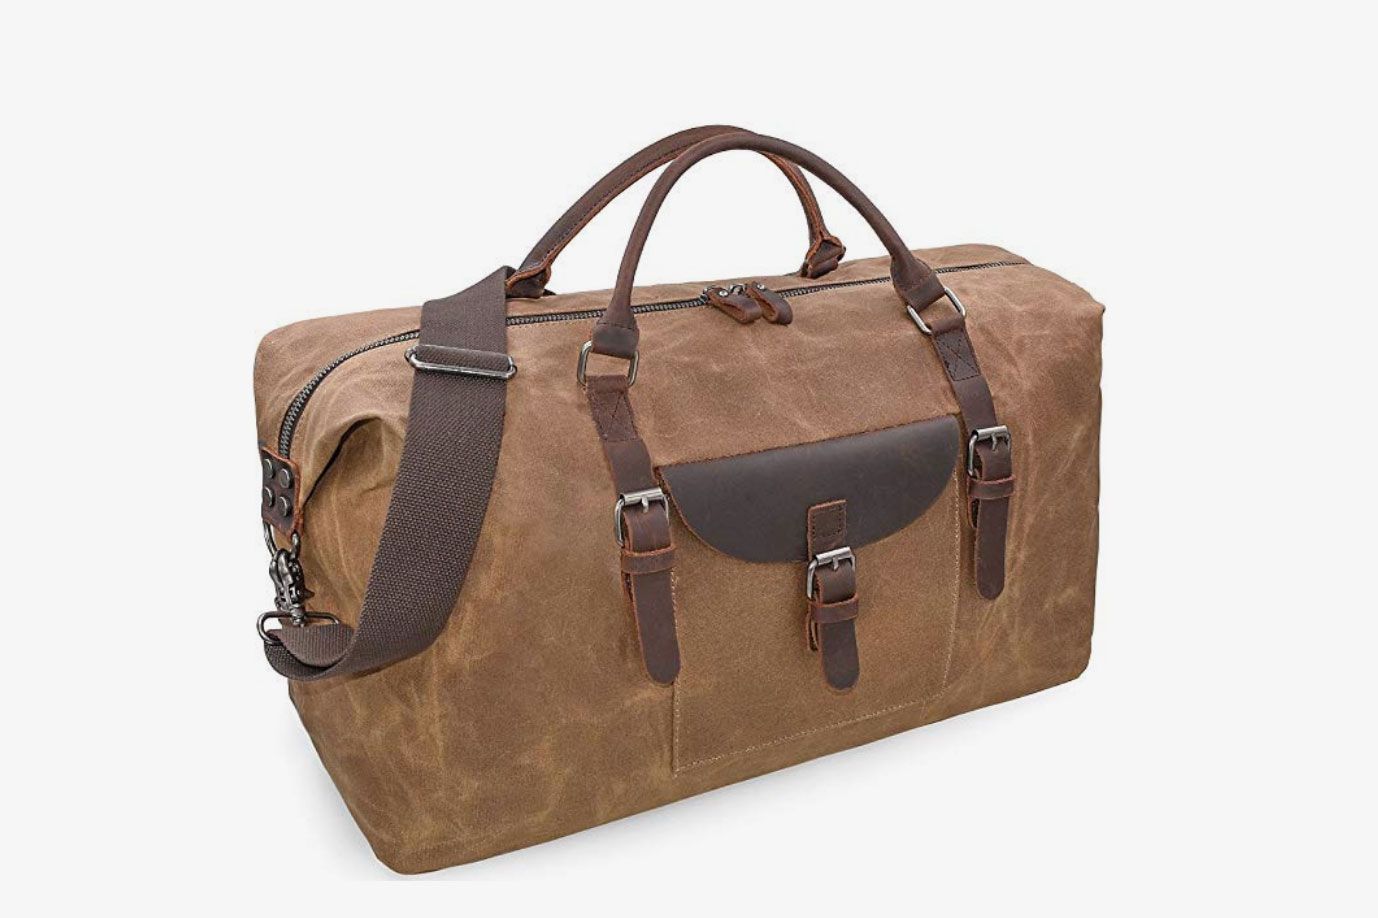 MMPY Oversized Canvas PU Leather Trim Travel Duffel Bag Weekender Bag for Women and Ladies 